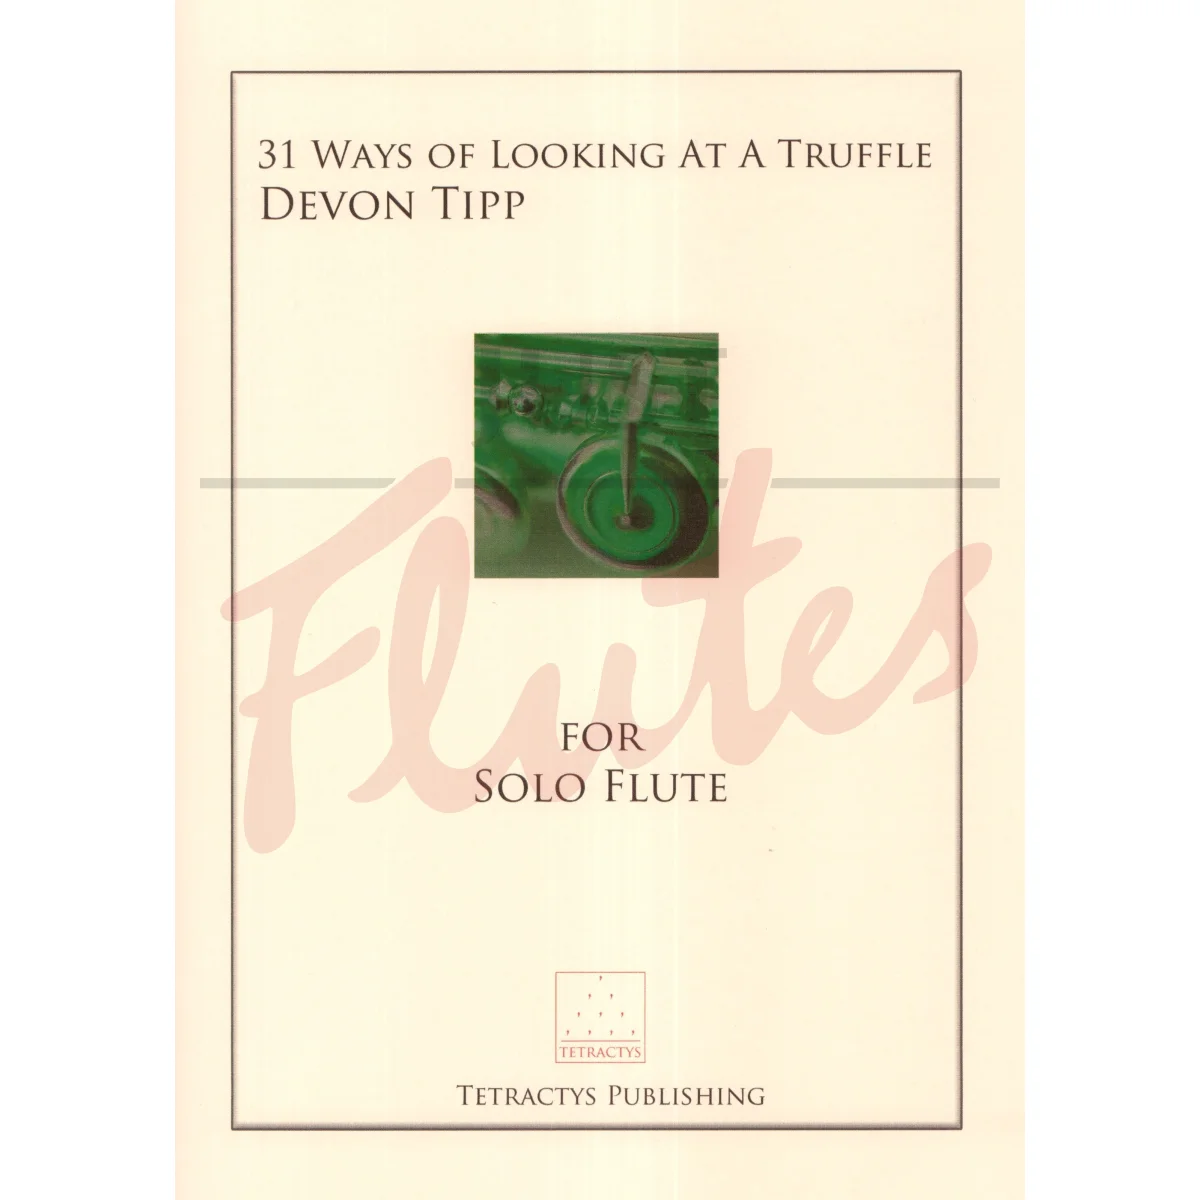 31 Ways of Looking at a Truffle for Solo Flute